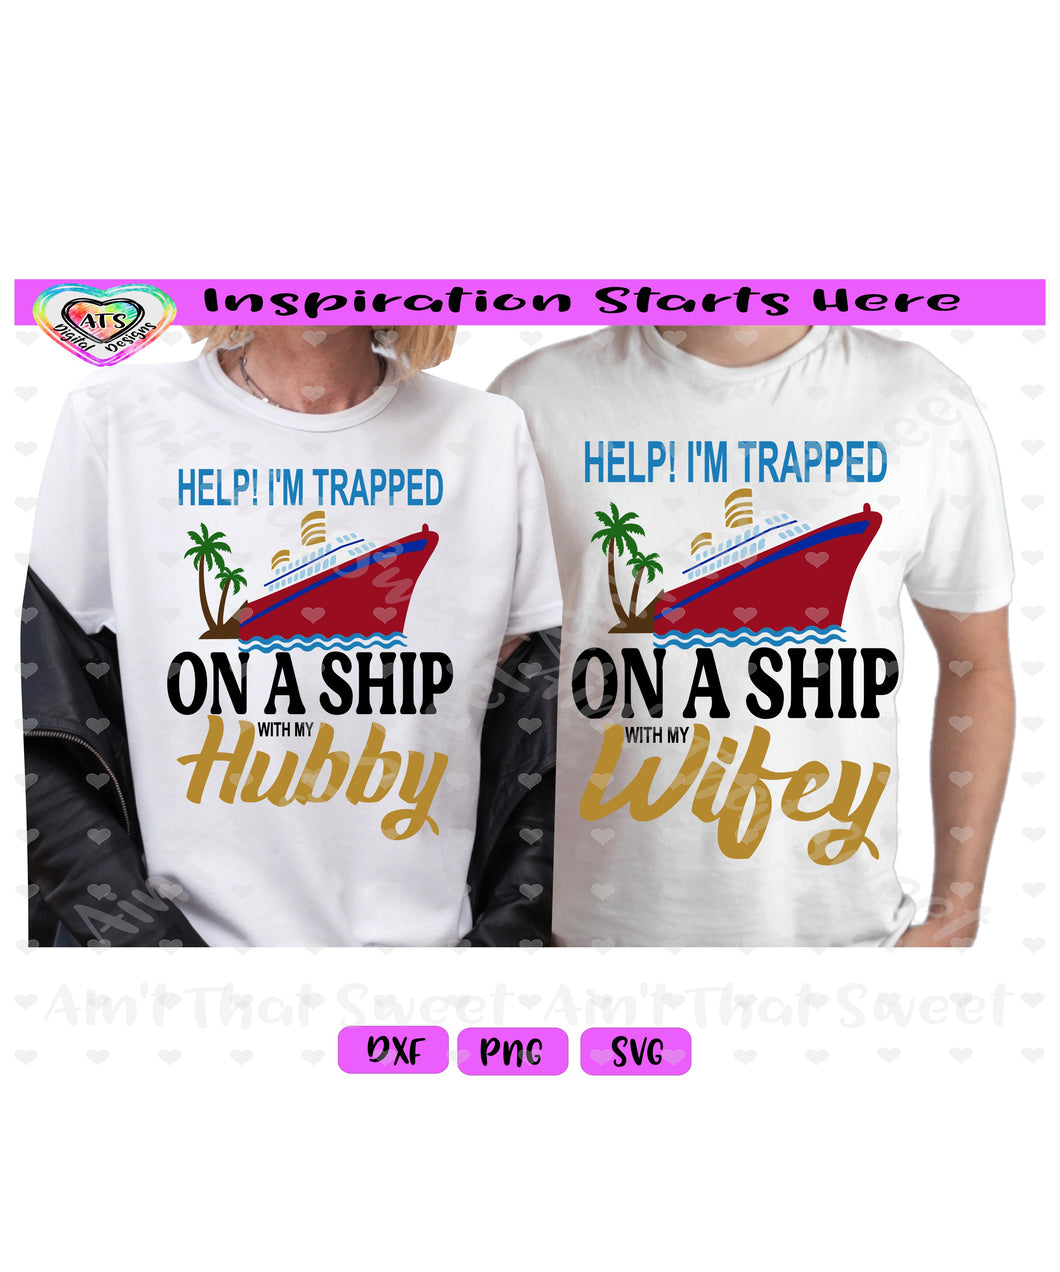 Help! I'm Trapped On a Ship With My Hubby/Wifey | Two Shirt Set - Transparent PNG SVG DXF - Silhouette, Cricut, ScanNCut